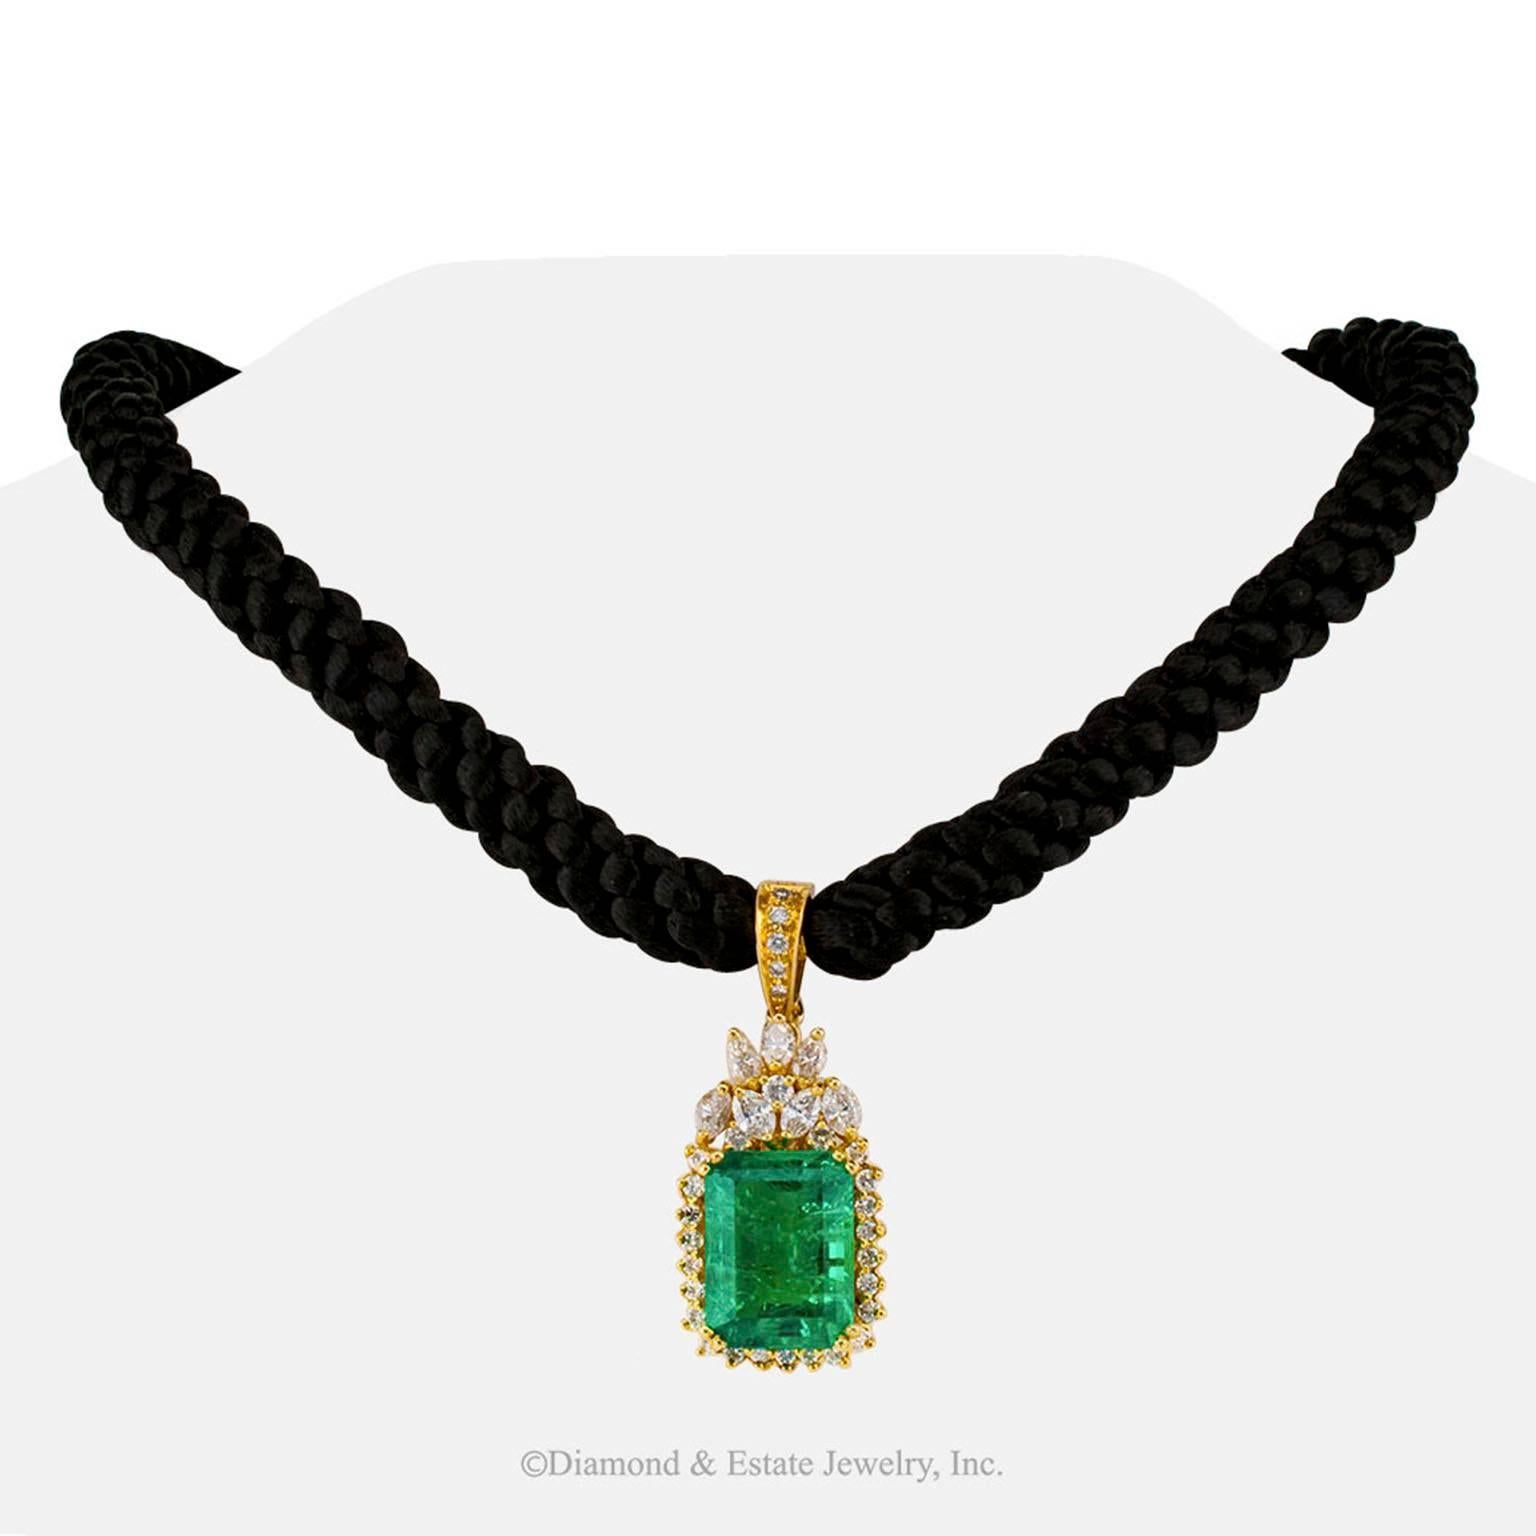 Colombian Emerald Diamond Gold Enhancer Pendant

Emerald-cut 14.00 carats Colombian emerald and diamond gold enhancer pendant circa 1990.  Take-your-breath-away Colombian emerald color beaming from the approximately 14.00 carats emerald-cut emerald,